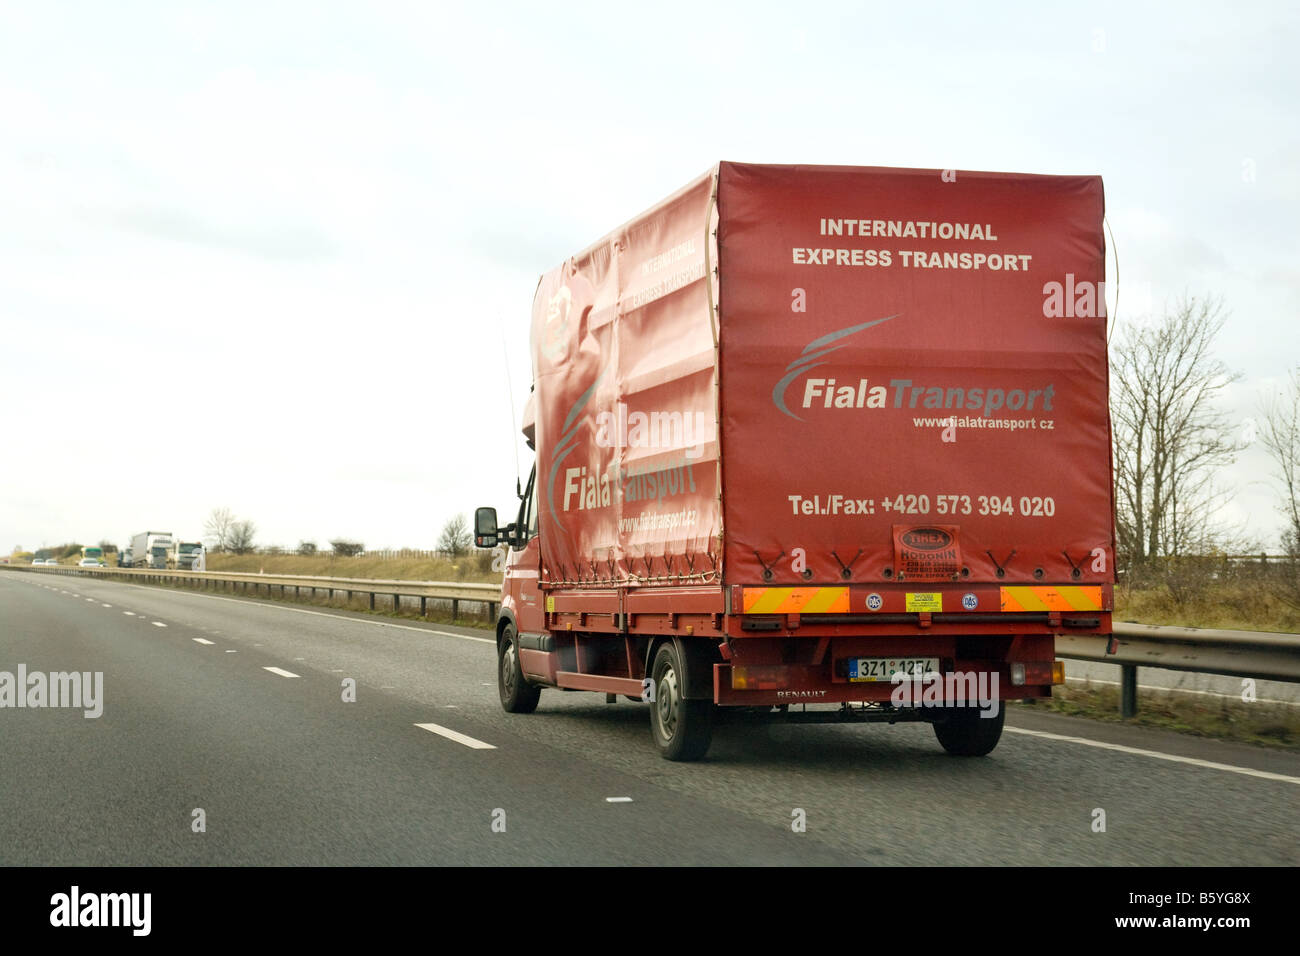 A Fiala transport lorry on the A14, Suffolk, UK Stock Photo